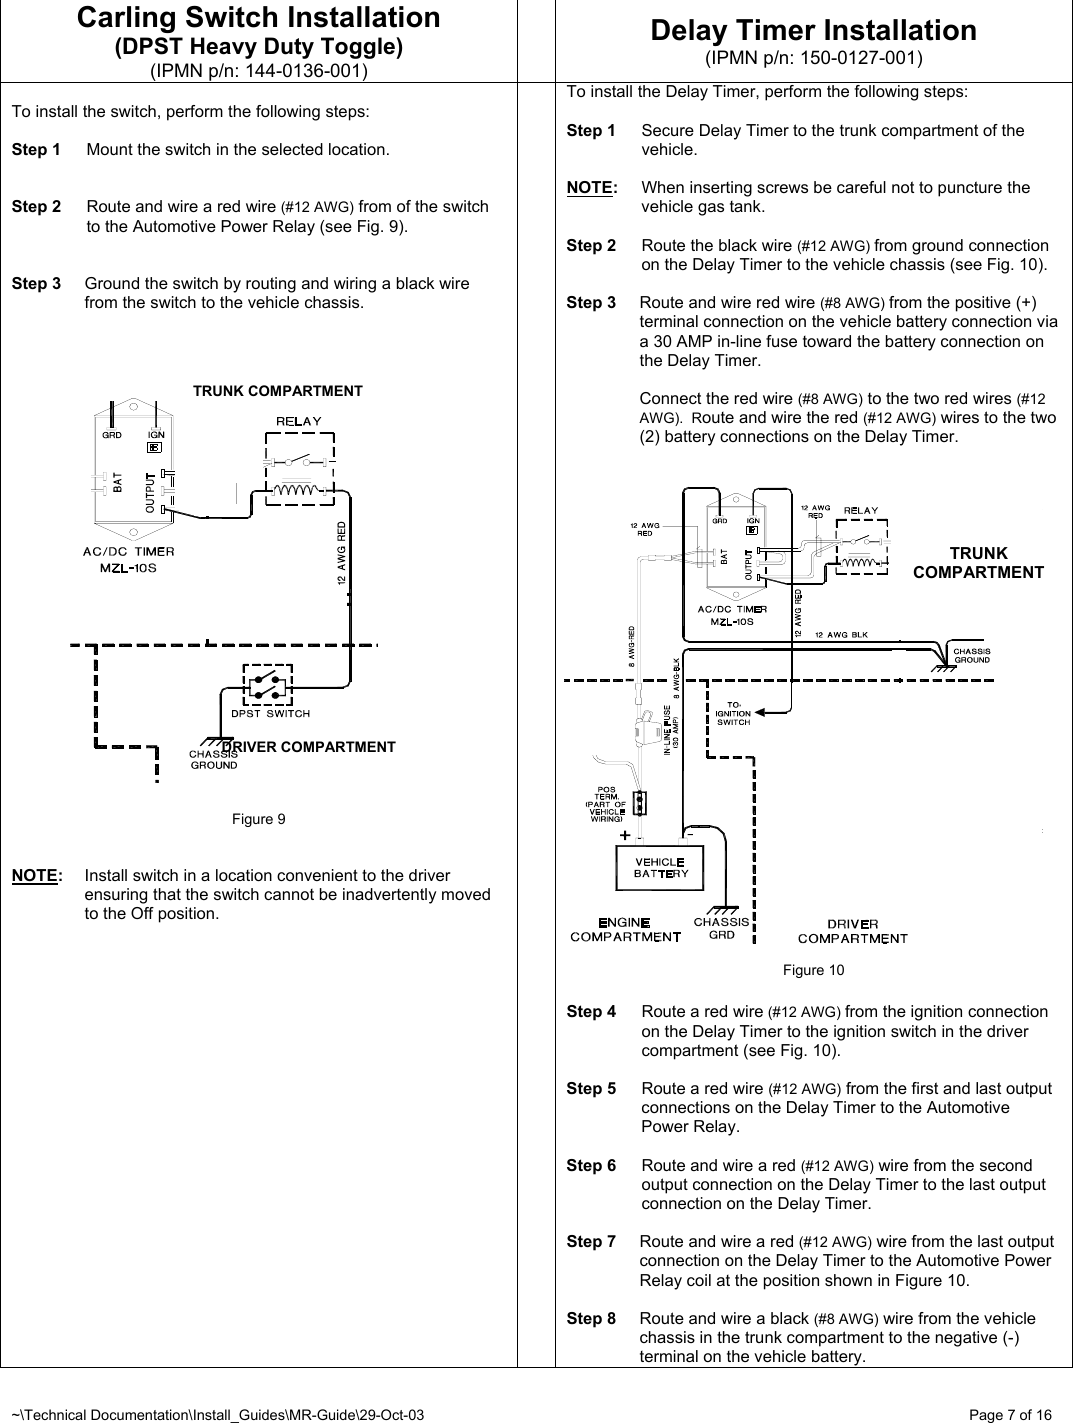 ~\Technical Documentation\Install_Guides\MR-Guide\29-Oct-03   Page 7 of 16 TRUNK COMPARTMENTTRUNK COMPARTMENT DRIVER COMPARTMENT Carling Switch Installation (DPST Heavy Duty Toggle) (IPMN p/n: 144-0136-001)  Delay Timer Installation (IPMN p/n: 150-0127-001)  To install the switch, perform the following steps:  Step 1  Mount the switch in the selected location.   Step 2  Route and wire a red wire (#12 AWG) from of the switch to the Automotive Power Relay (see Fig. 9).   Step 3  Ground the switch by routing and wiring a black wire from the switch to the vehicle chassis.                            Figure 9   NOTE:  Install switch in a location convenient to the driver ensuring that the switch cannot be inadvertently moved to the Off position.  To install the Delay Timer, perform the following steps:  Step 1  Secure Delay Timer to the trunk compartment of the vehicle.  NOTE:  When inserting screws be careful not to puncture the vehicle gas tank.  Step 2  Route the black wire (#12 AWG) from ground connection on the Delay Timer to the vehicle chassis (see Fig. 10).  Step 3  Route and wire red wire (#8 AWG) from the positive (+) terminal connection on the vehicle battery connection via a 30 AMP in-line fuse toward the battery connection on the Delay Timer.    Connect the red wire (#8 AWG) to the two red wires (#12 AWG).  Route and wire the red (#12 AWG) wires to the two (2) battery connections on the Delay Timer.                       Figure 10  Step 4  Route a red wire (#12 AWG) from the ignition connection on the Delay Timer to the ignition switch in the driver compartment (see Fig. 10).  Step 5  Route a red wire (#12 AWG) from the first and last output connections on the Delay Timer to the Automotive Power Relay.  Step 6  Route and wire a red (#12 AWG) wire from the second output connection on the Delay Timer to the last output connection on the Delay Timer.   Step 7  Route and wire a red (#12 AWG) wire from the last output connection on the Delay Timer to the Automotive Power Relay coil at the position shown in Figure 10.  Step 8  Route and wire a black (#8 AWG) wire from the vehicle chassis in the trunk compartment to the negative (-) terminal on the vehicle battery. 